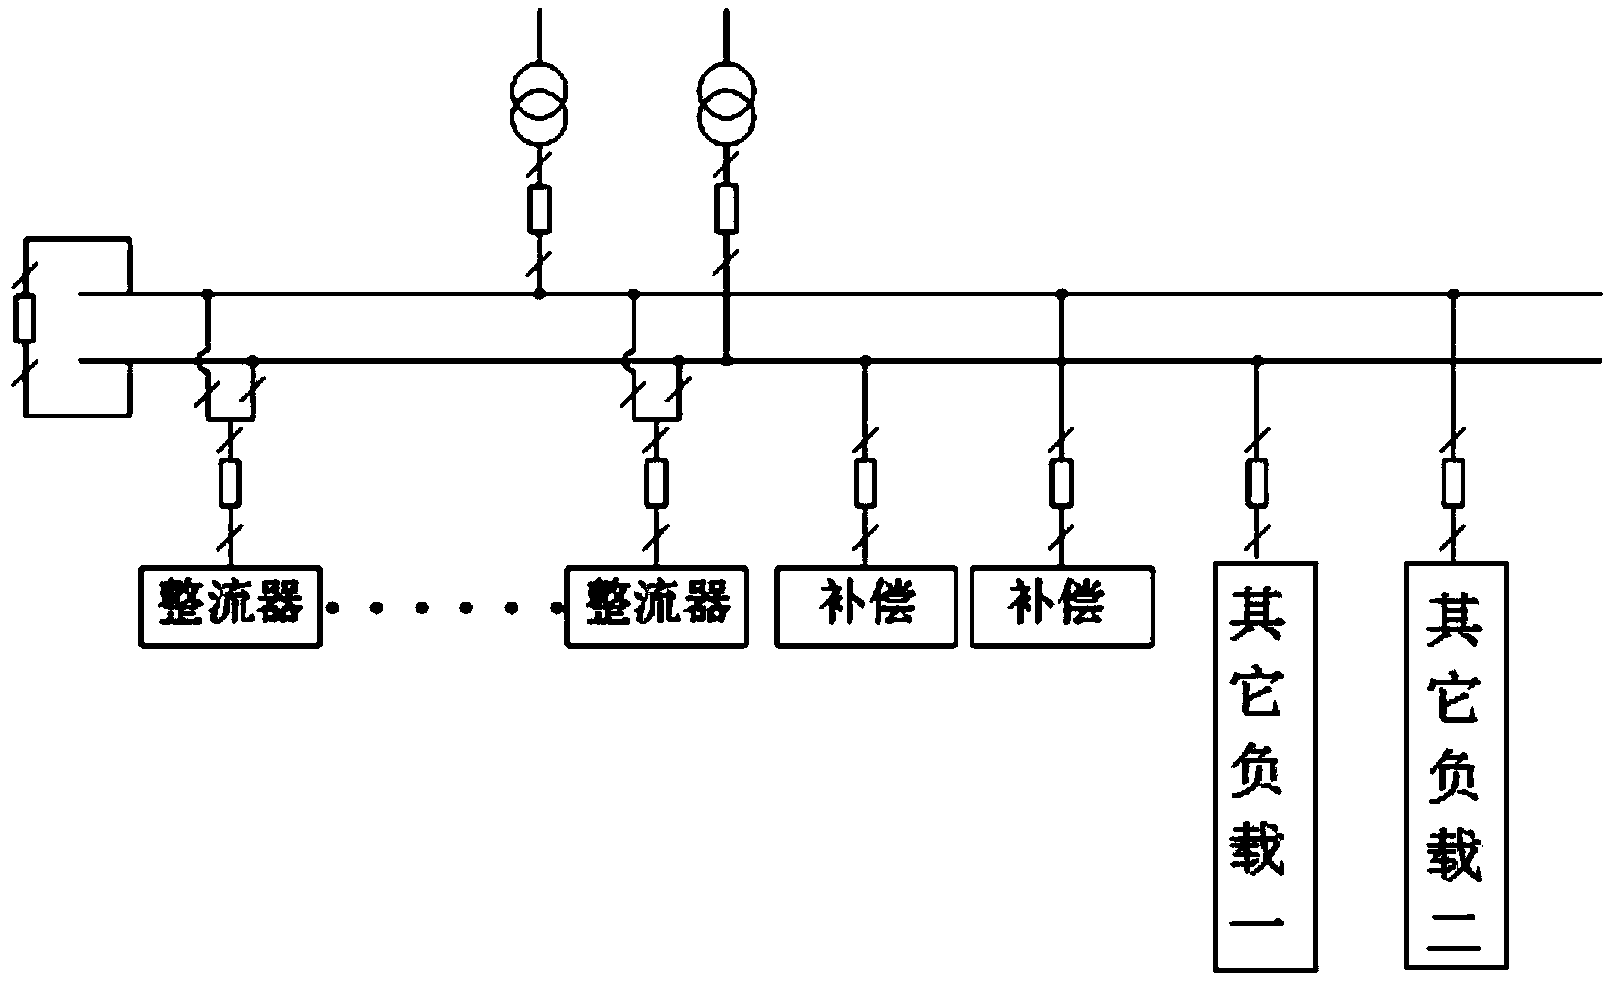 Main wiring system of electric automobile charging station system